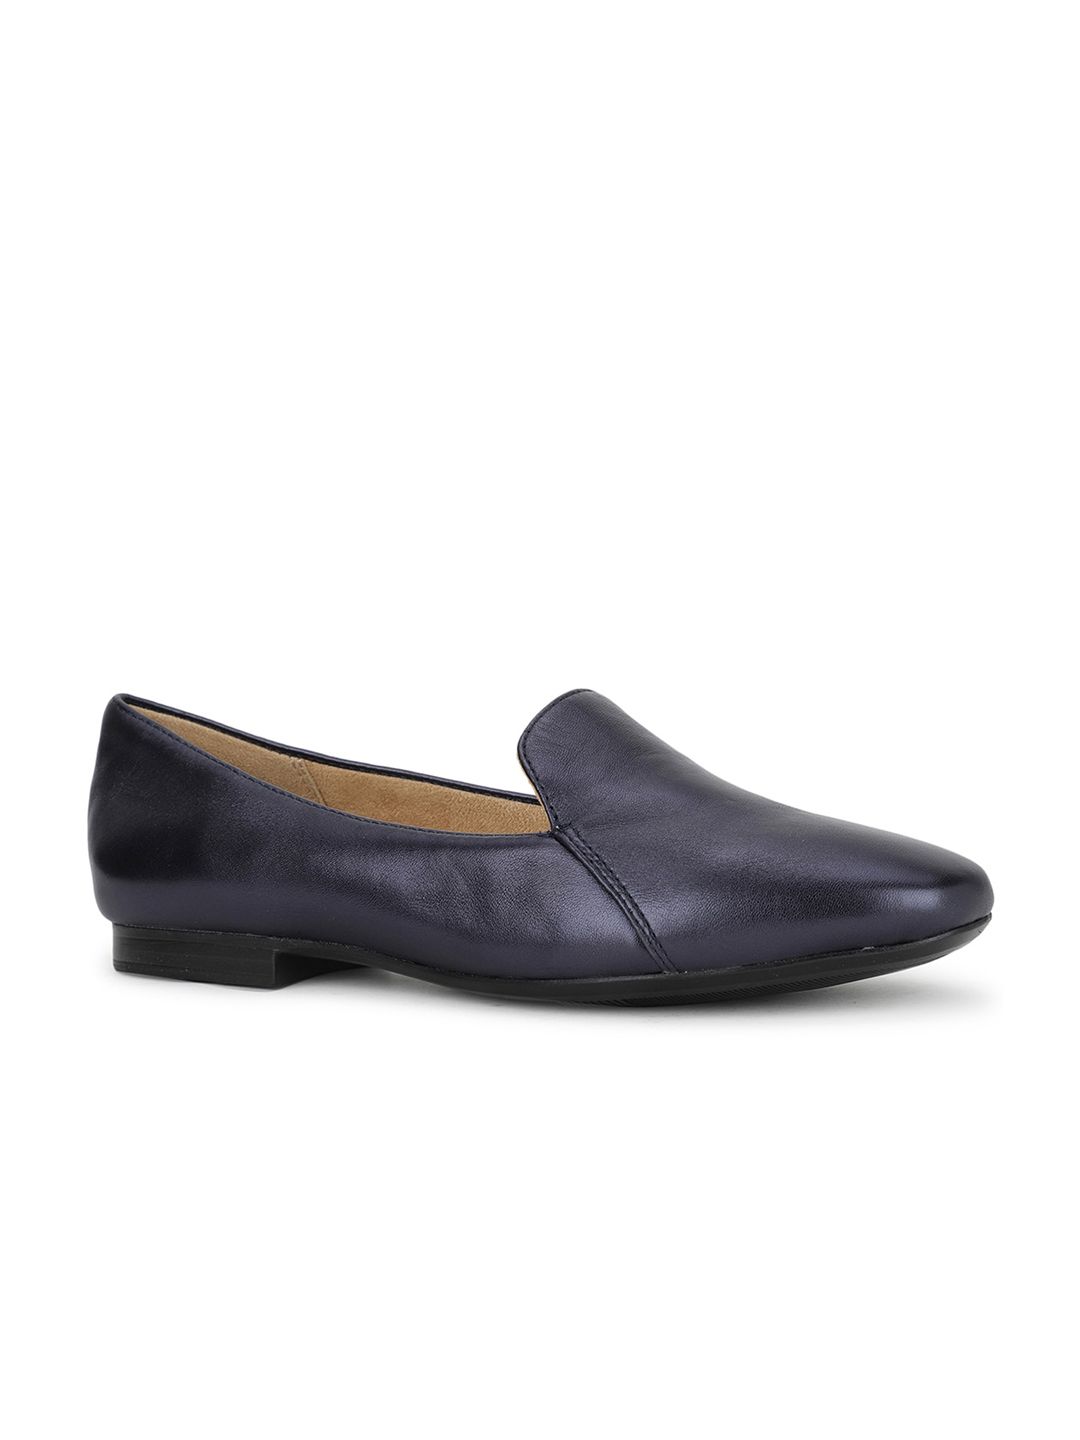 Naturalizer Women Navy Blue Leather Loafers Price in India